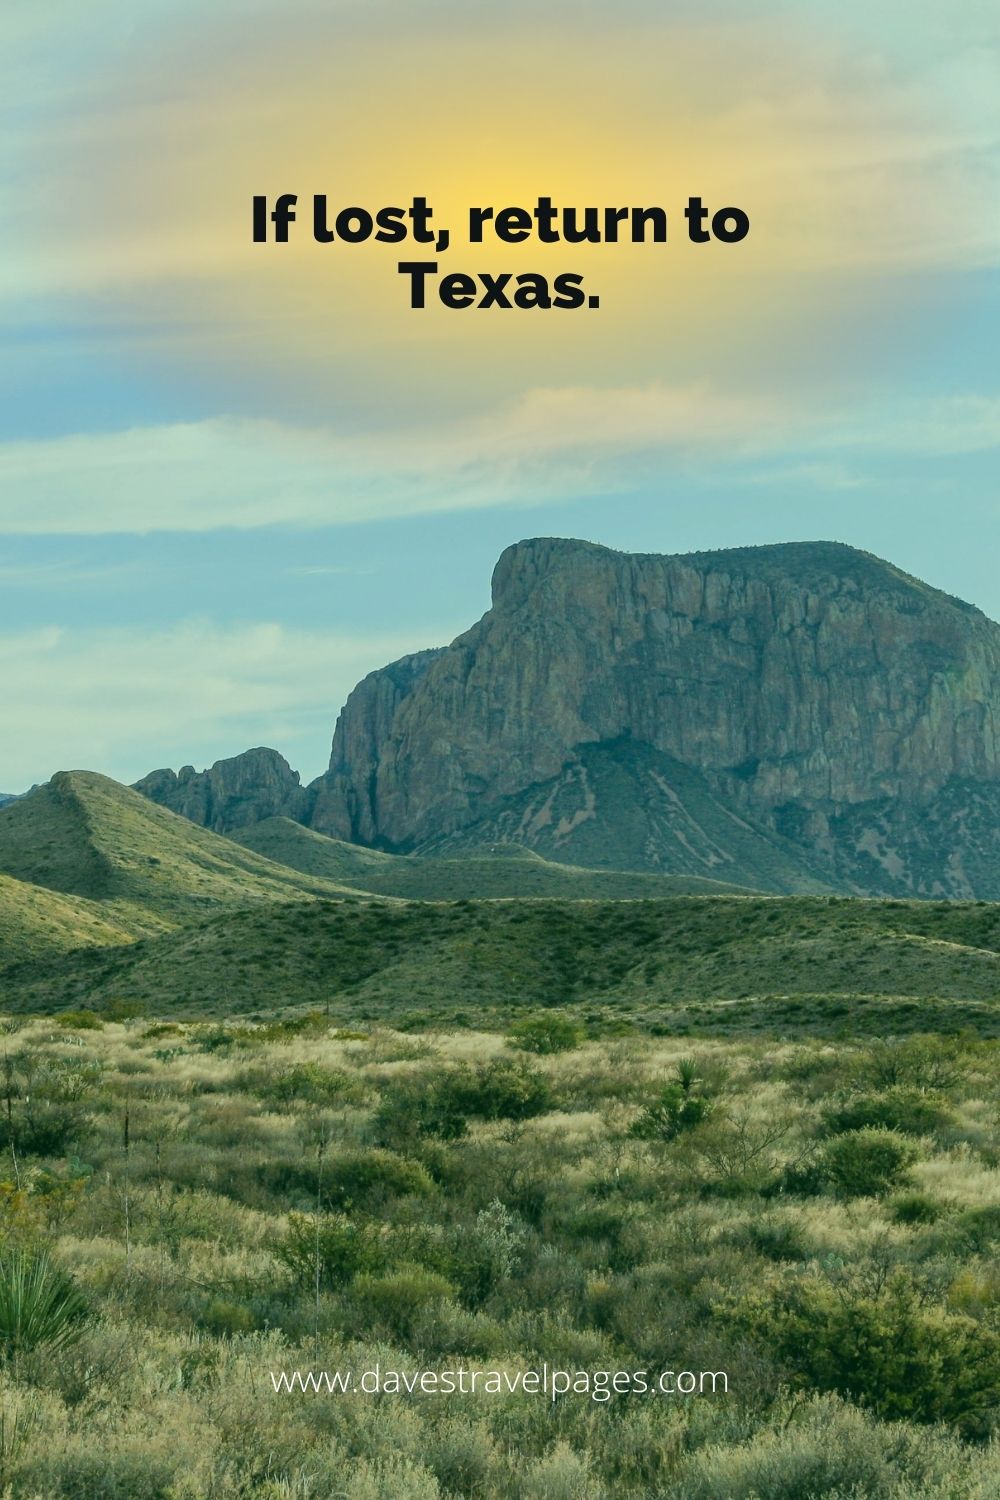 If lost, return to Texas